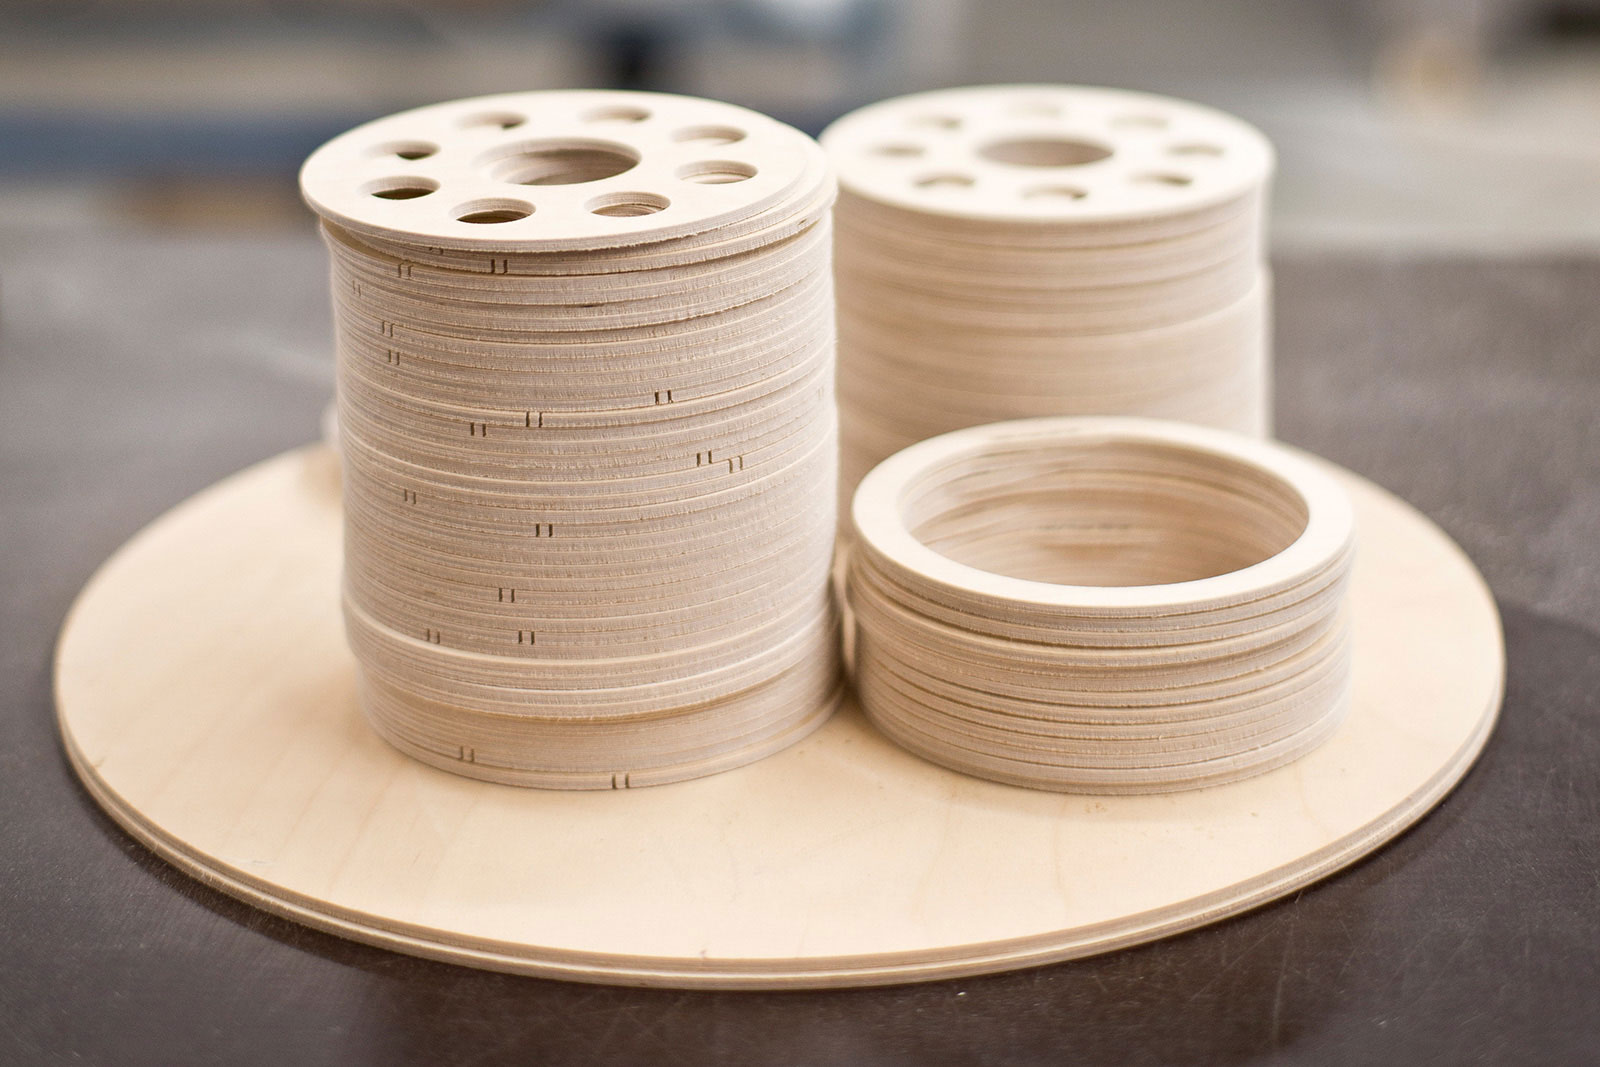 A close-up of three piles of the wooden rings used in some Secto Design lampshades.